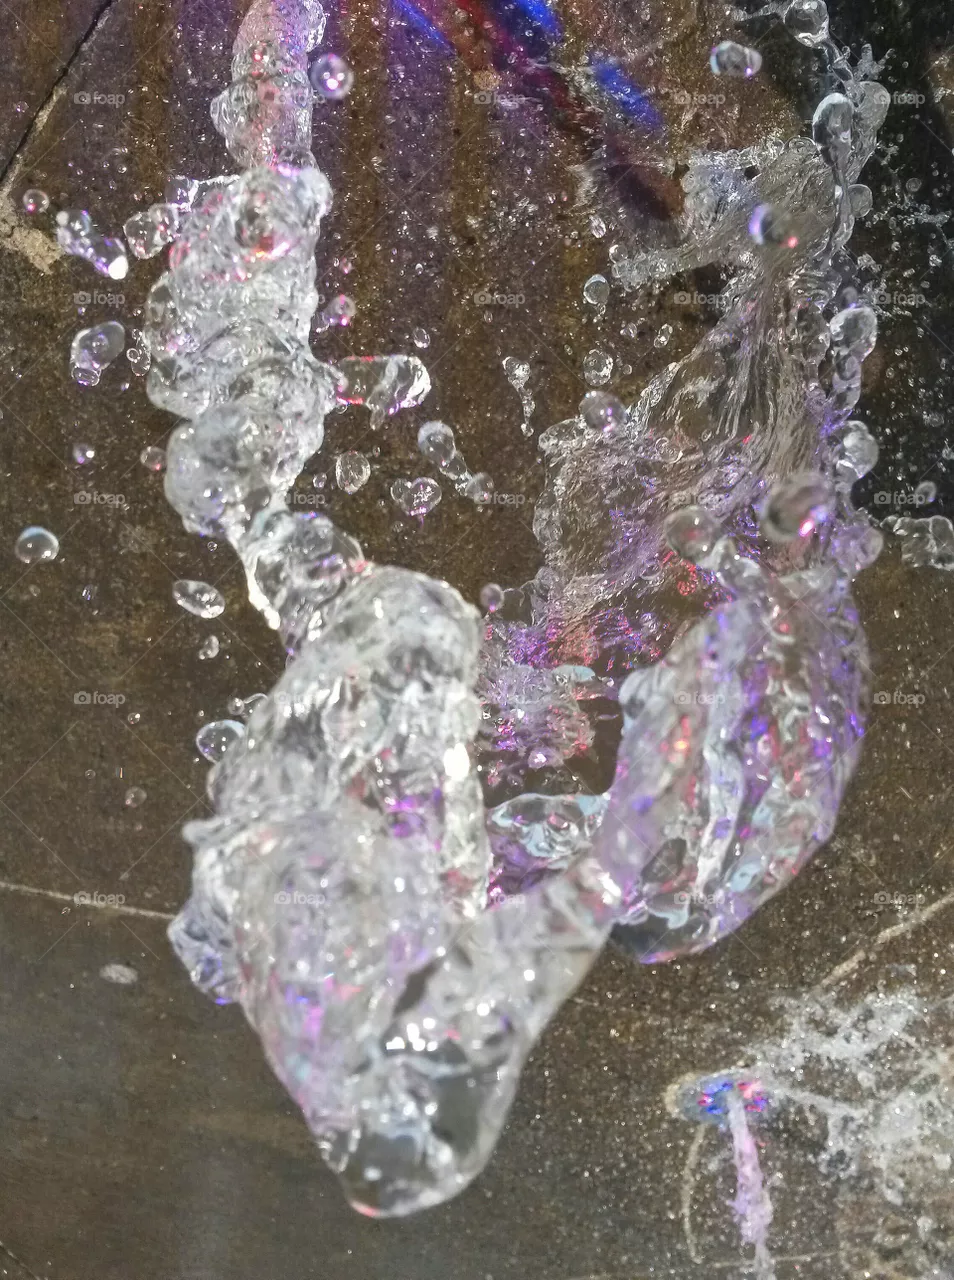 water in motion: Close up of water splash from a fountain with colored light